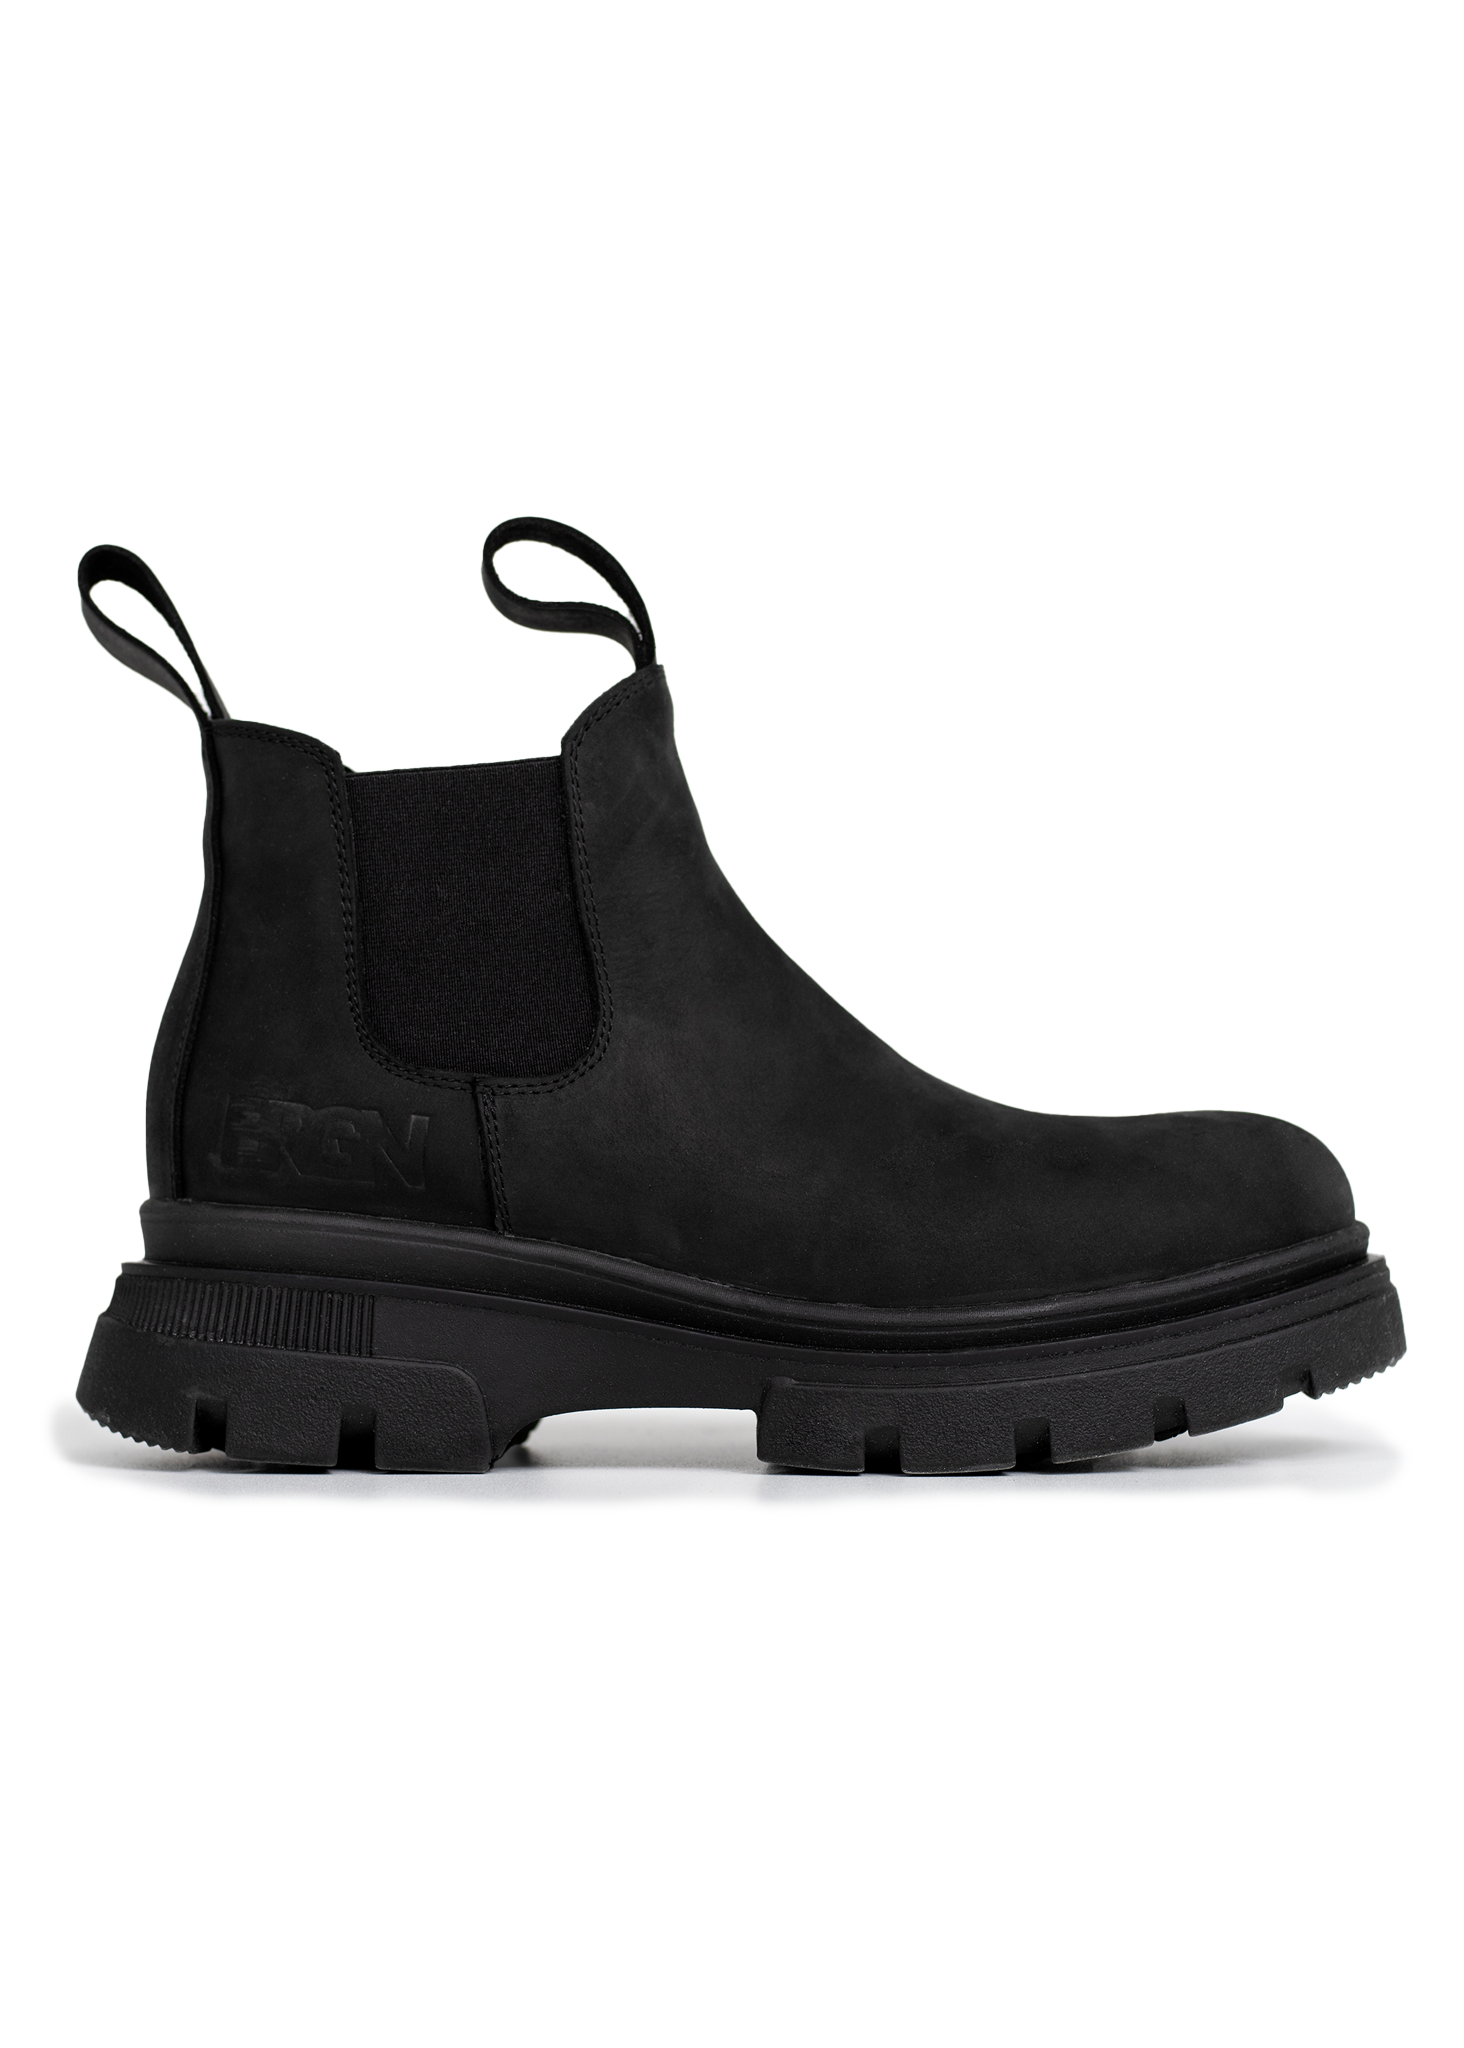 BRGN Low Chelsea Boot Shoes 095 New Black